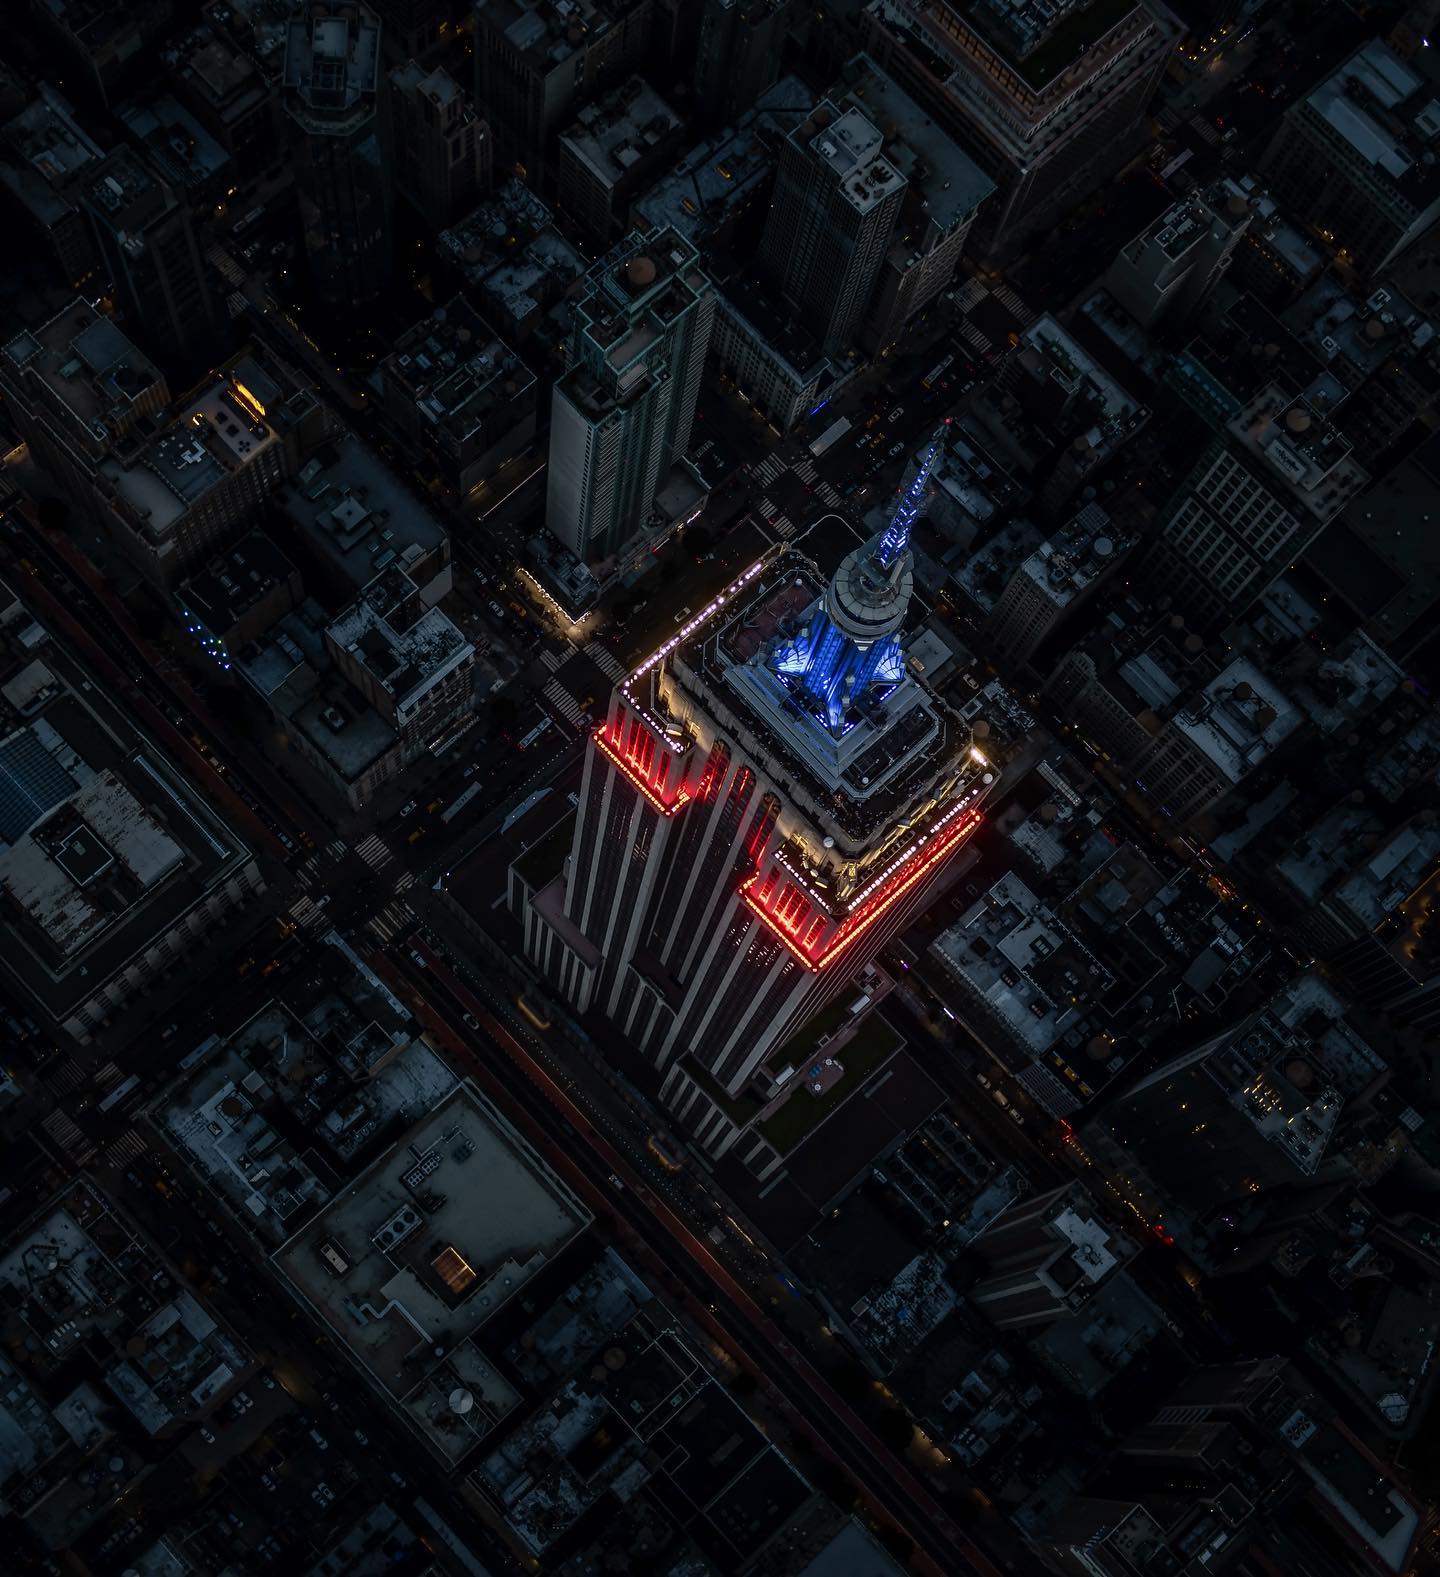  | Photo Title: Empire State Building Lit For Labor Day | Photo by Jennifer Khordi ©2020